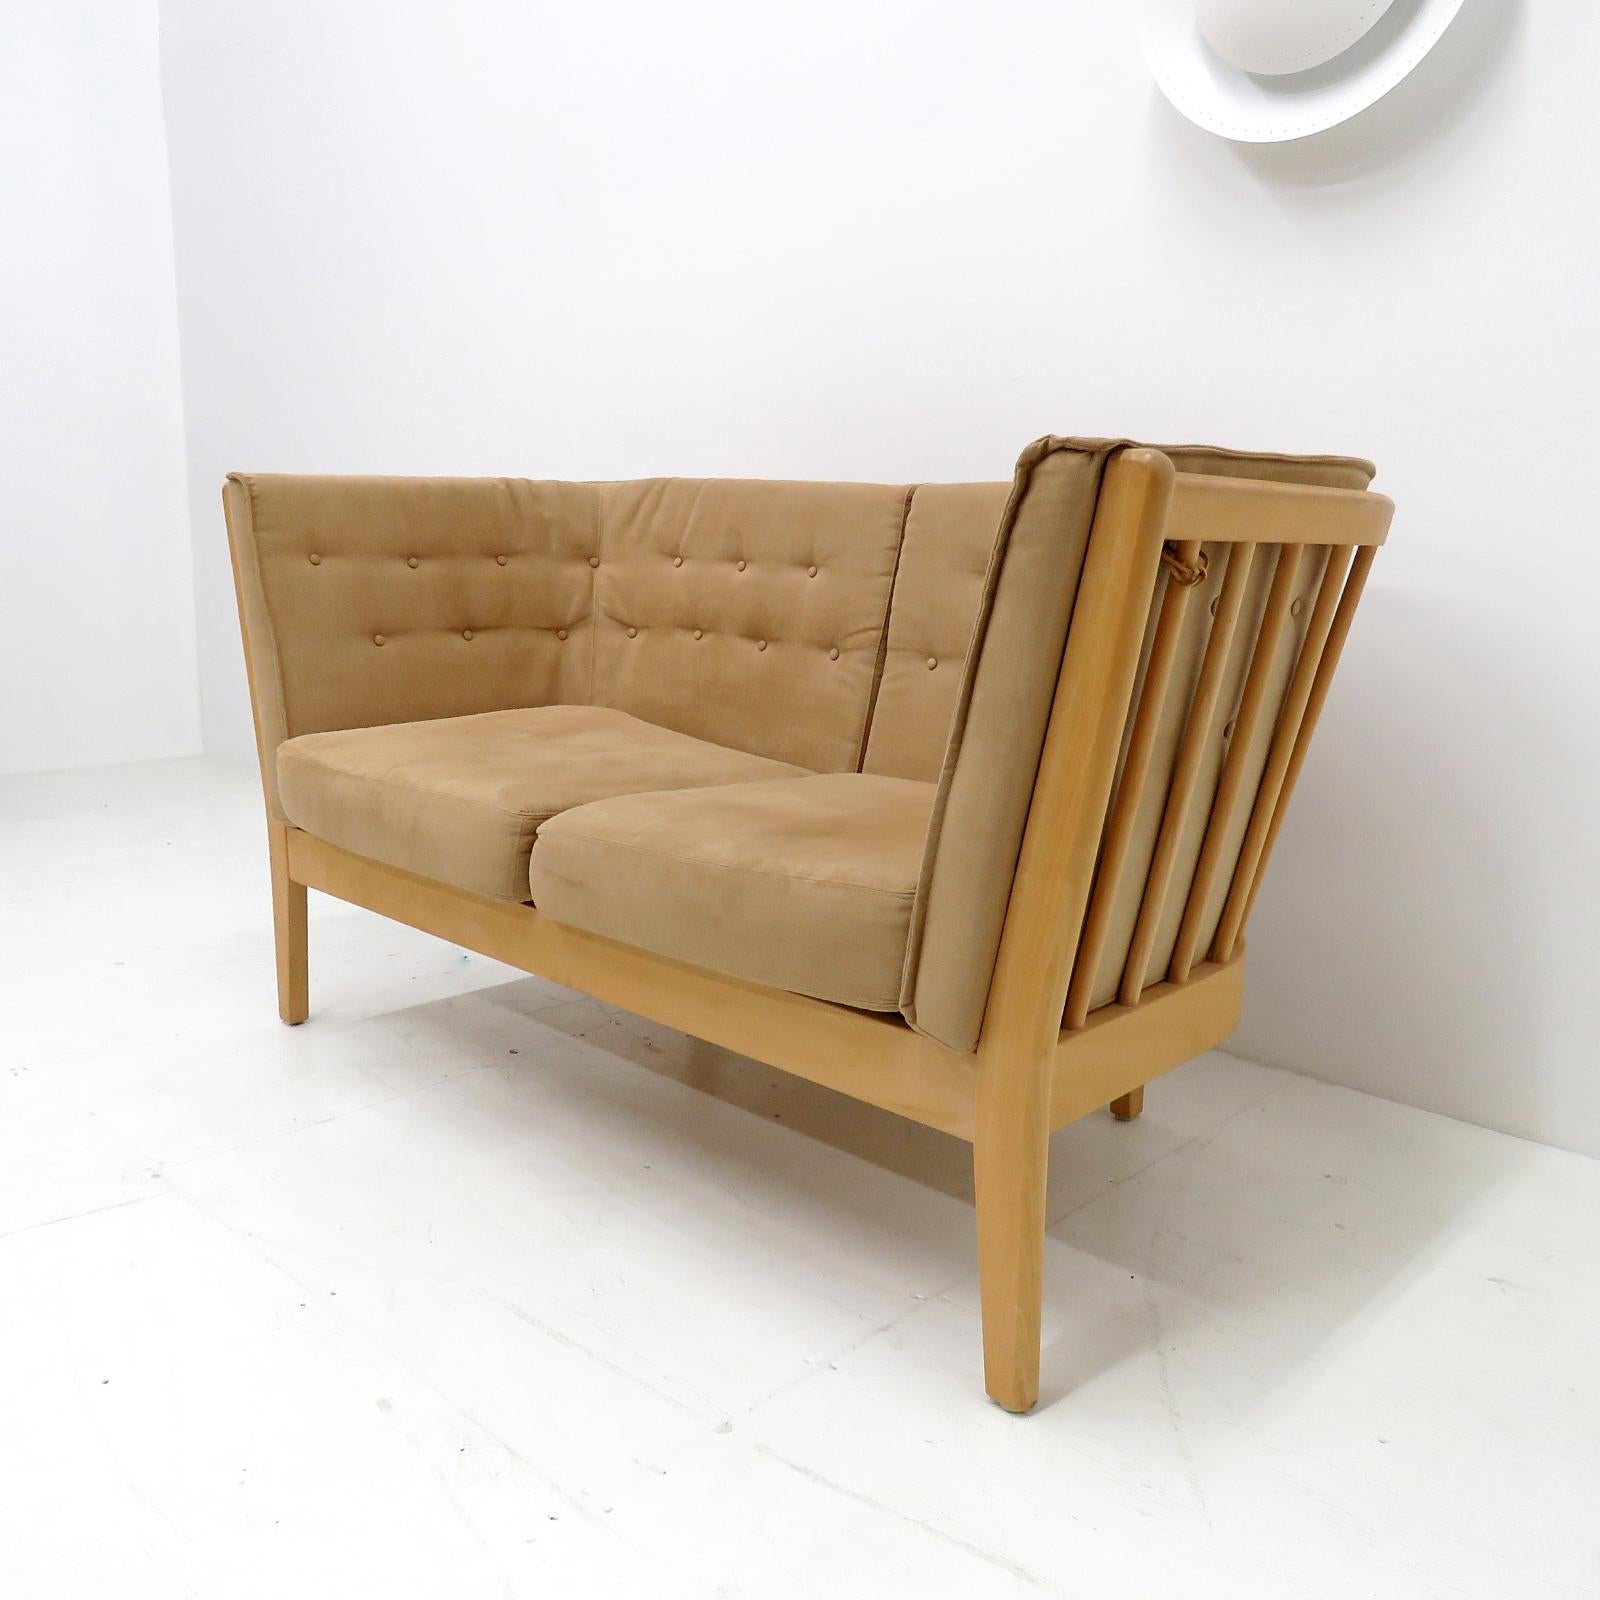 Wonderful Danish modern two seater sofa 'Maria', designed by Wojtek Depka Carstens for Stouby Mobler, with solid soap-treated beech wood frame and upholstered with tufted beige/camel colored alcantara (suede).